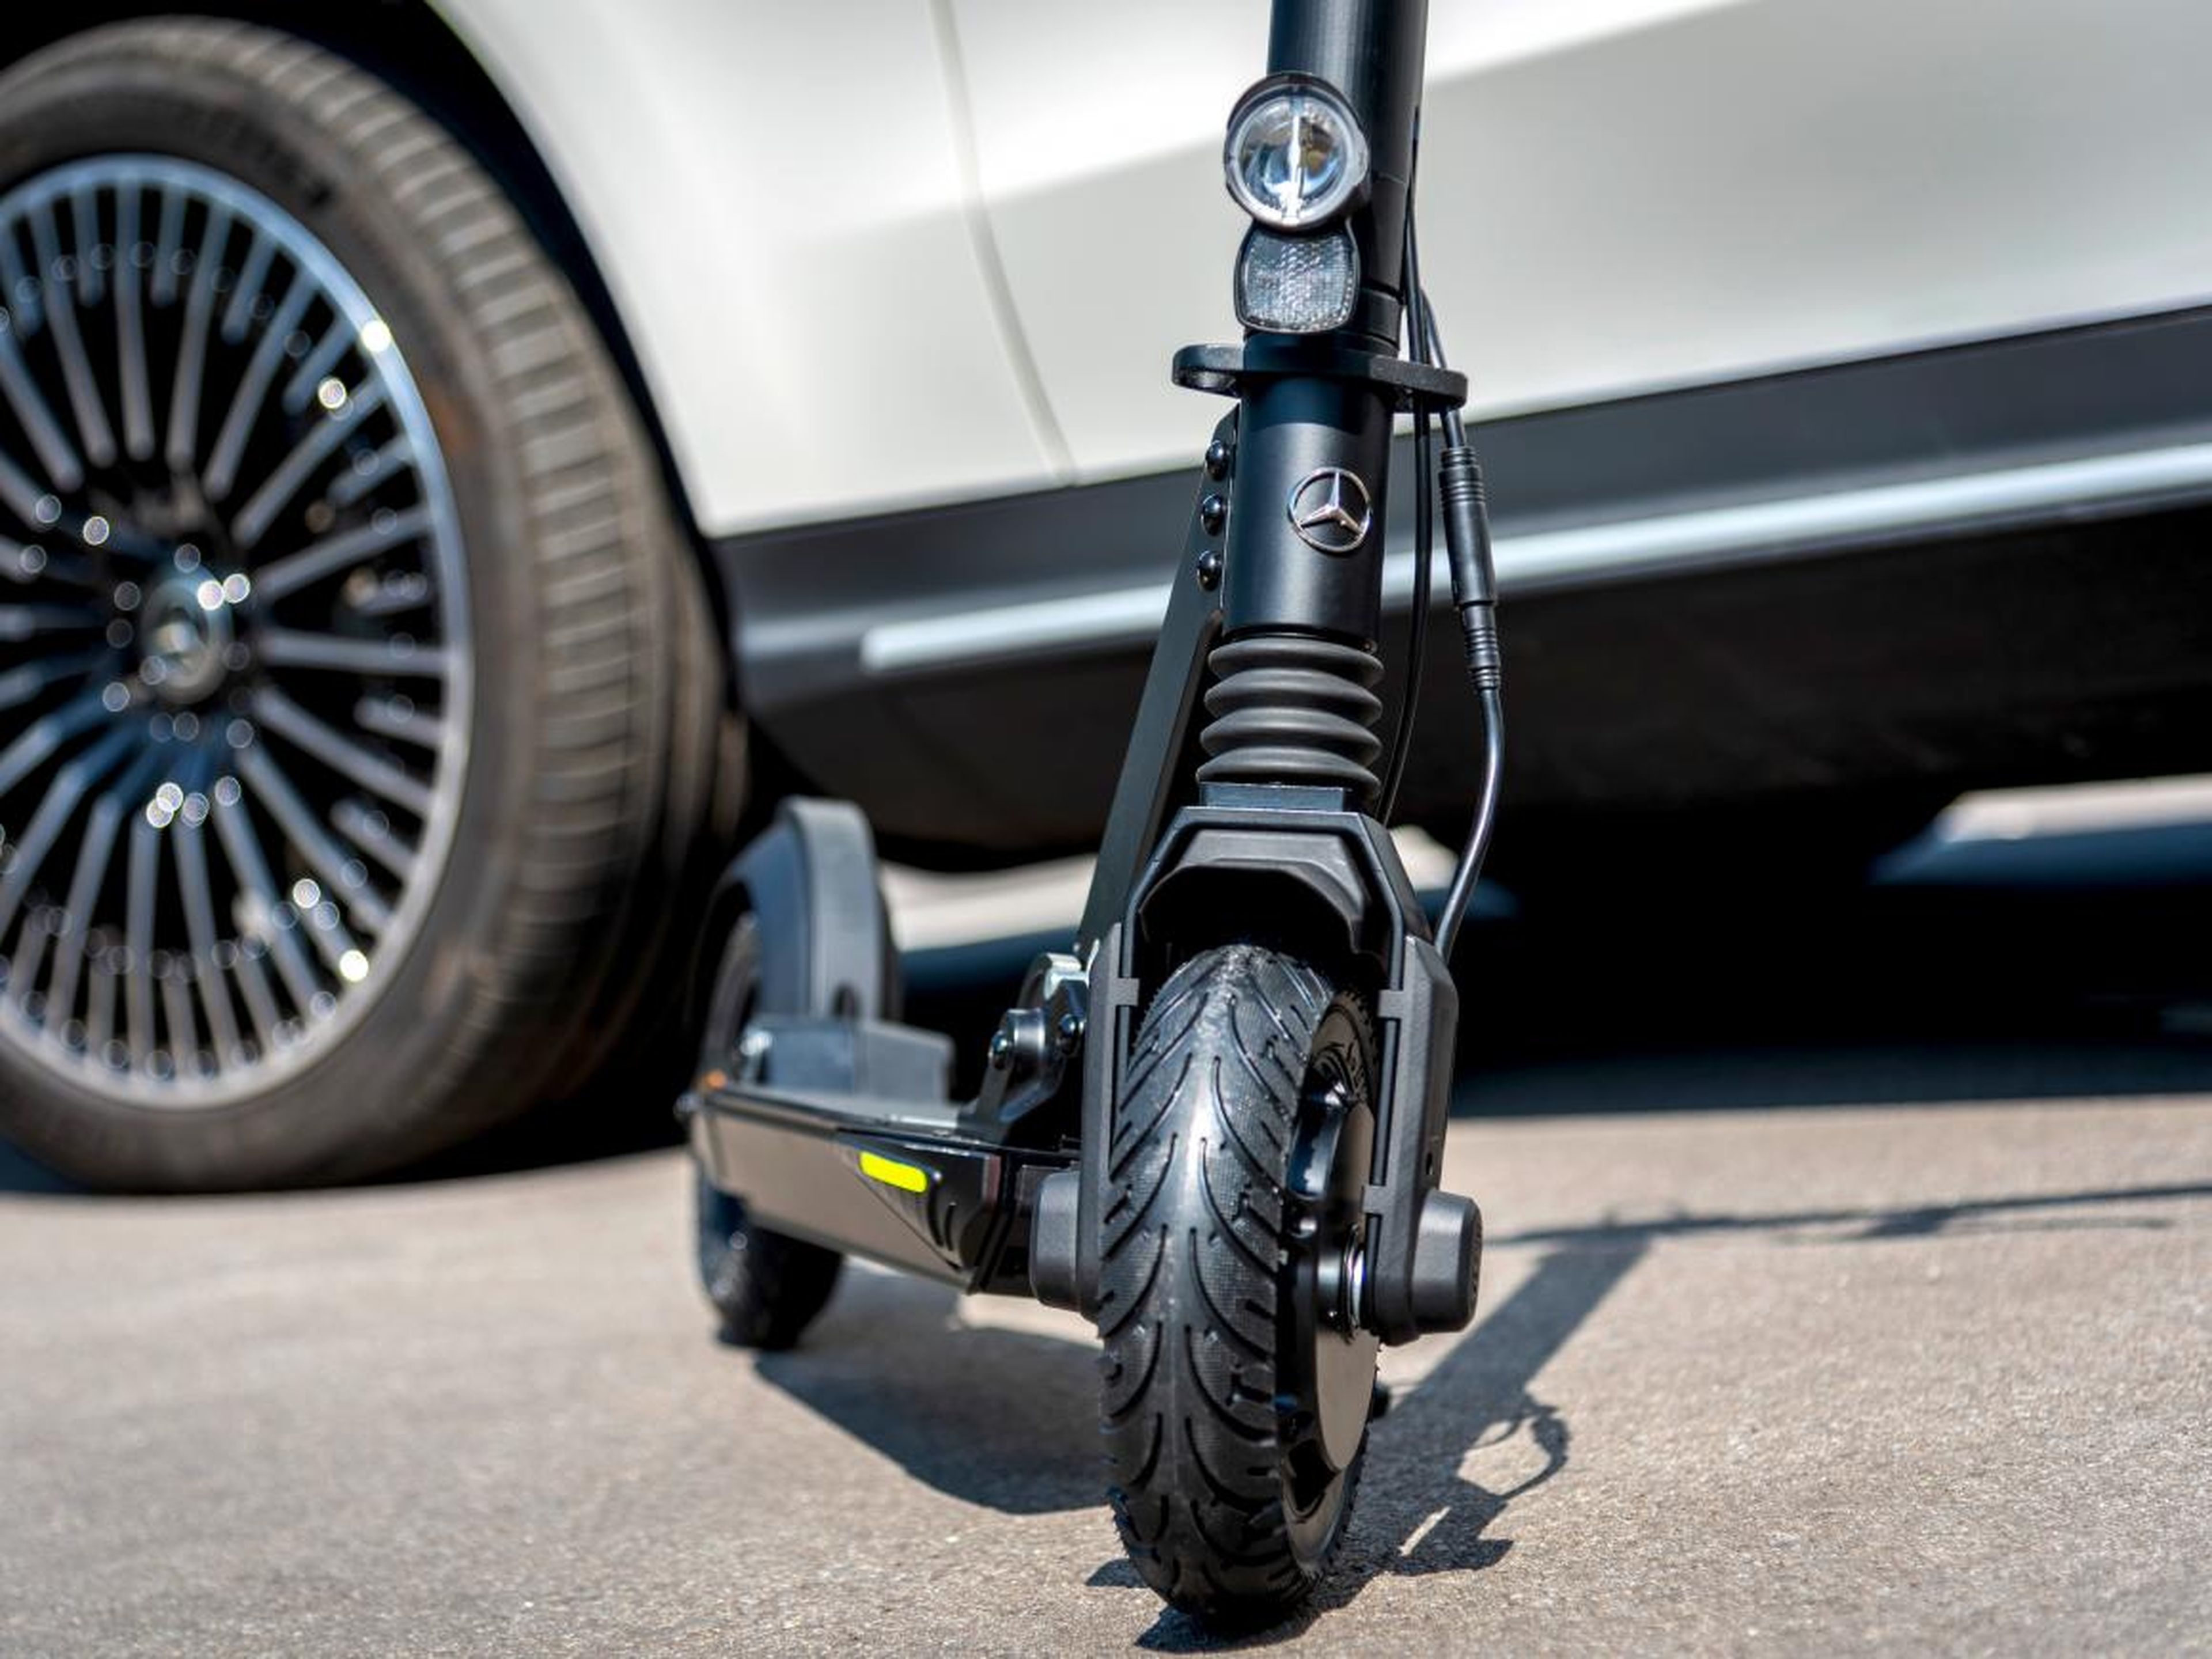 Mercedes-Benz is bringing out an e-scooter.